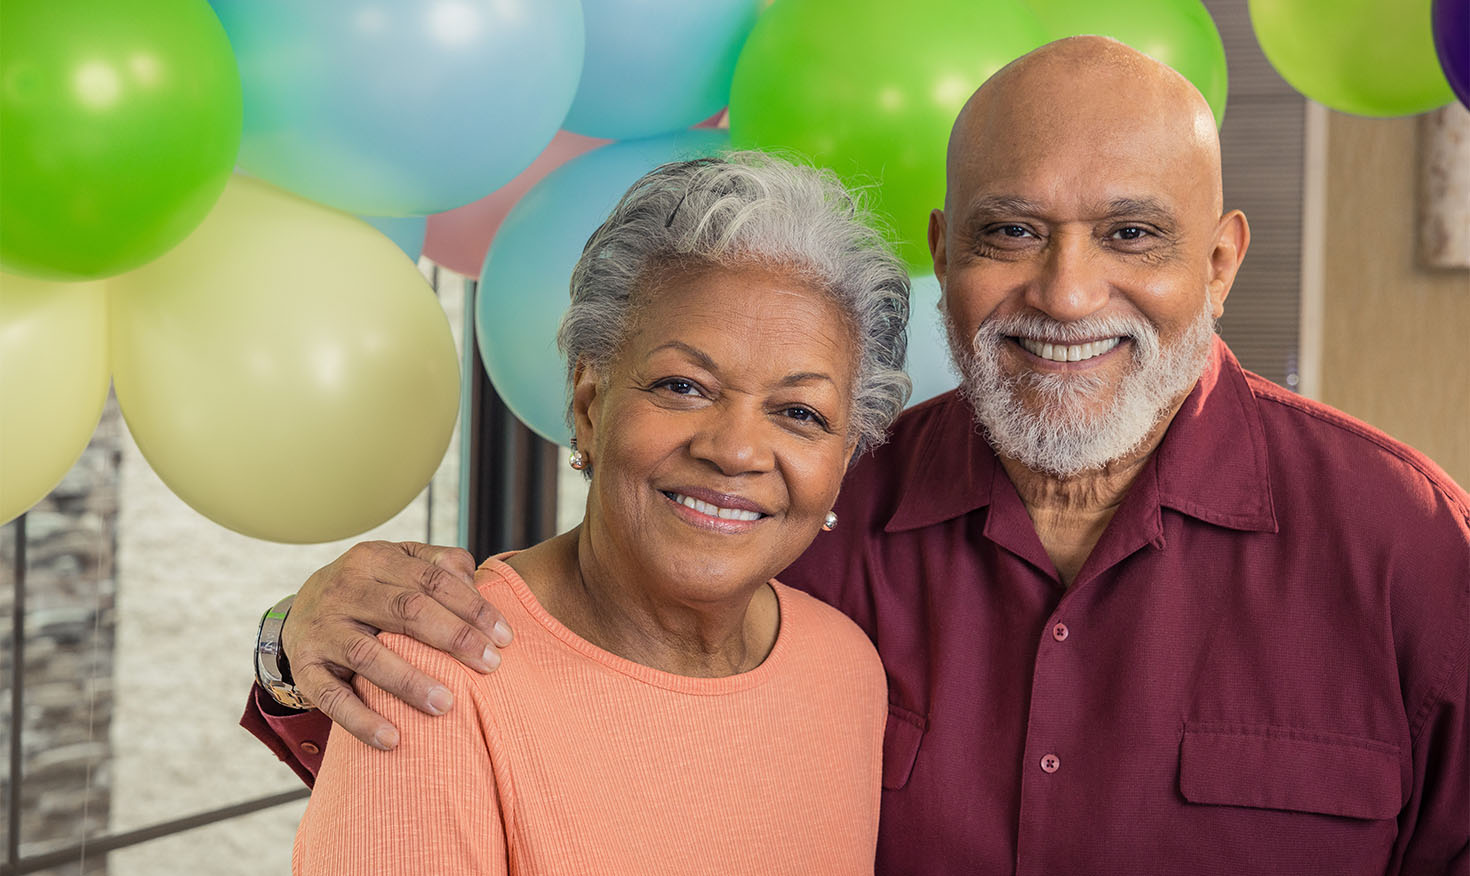 Senior couple at a birthday party with balloons in the background